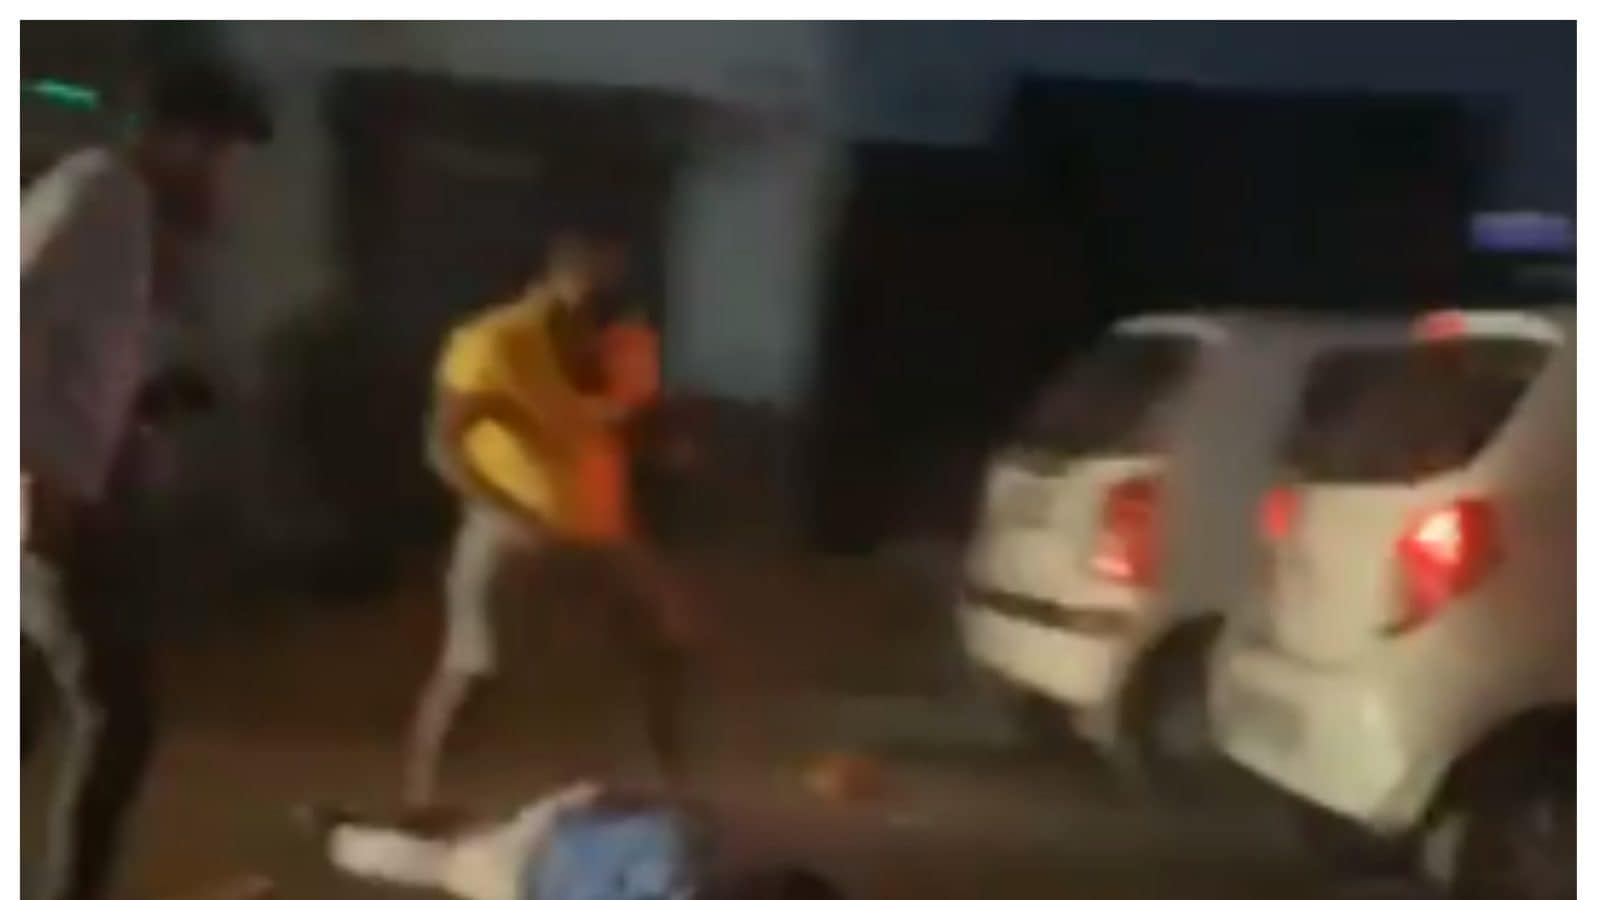 In UP's Ghaziabad, Man's Head Crushed With Brick in Brawl Outside Eatery Over Parking | VIDEO - News18